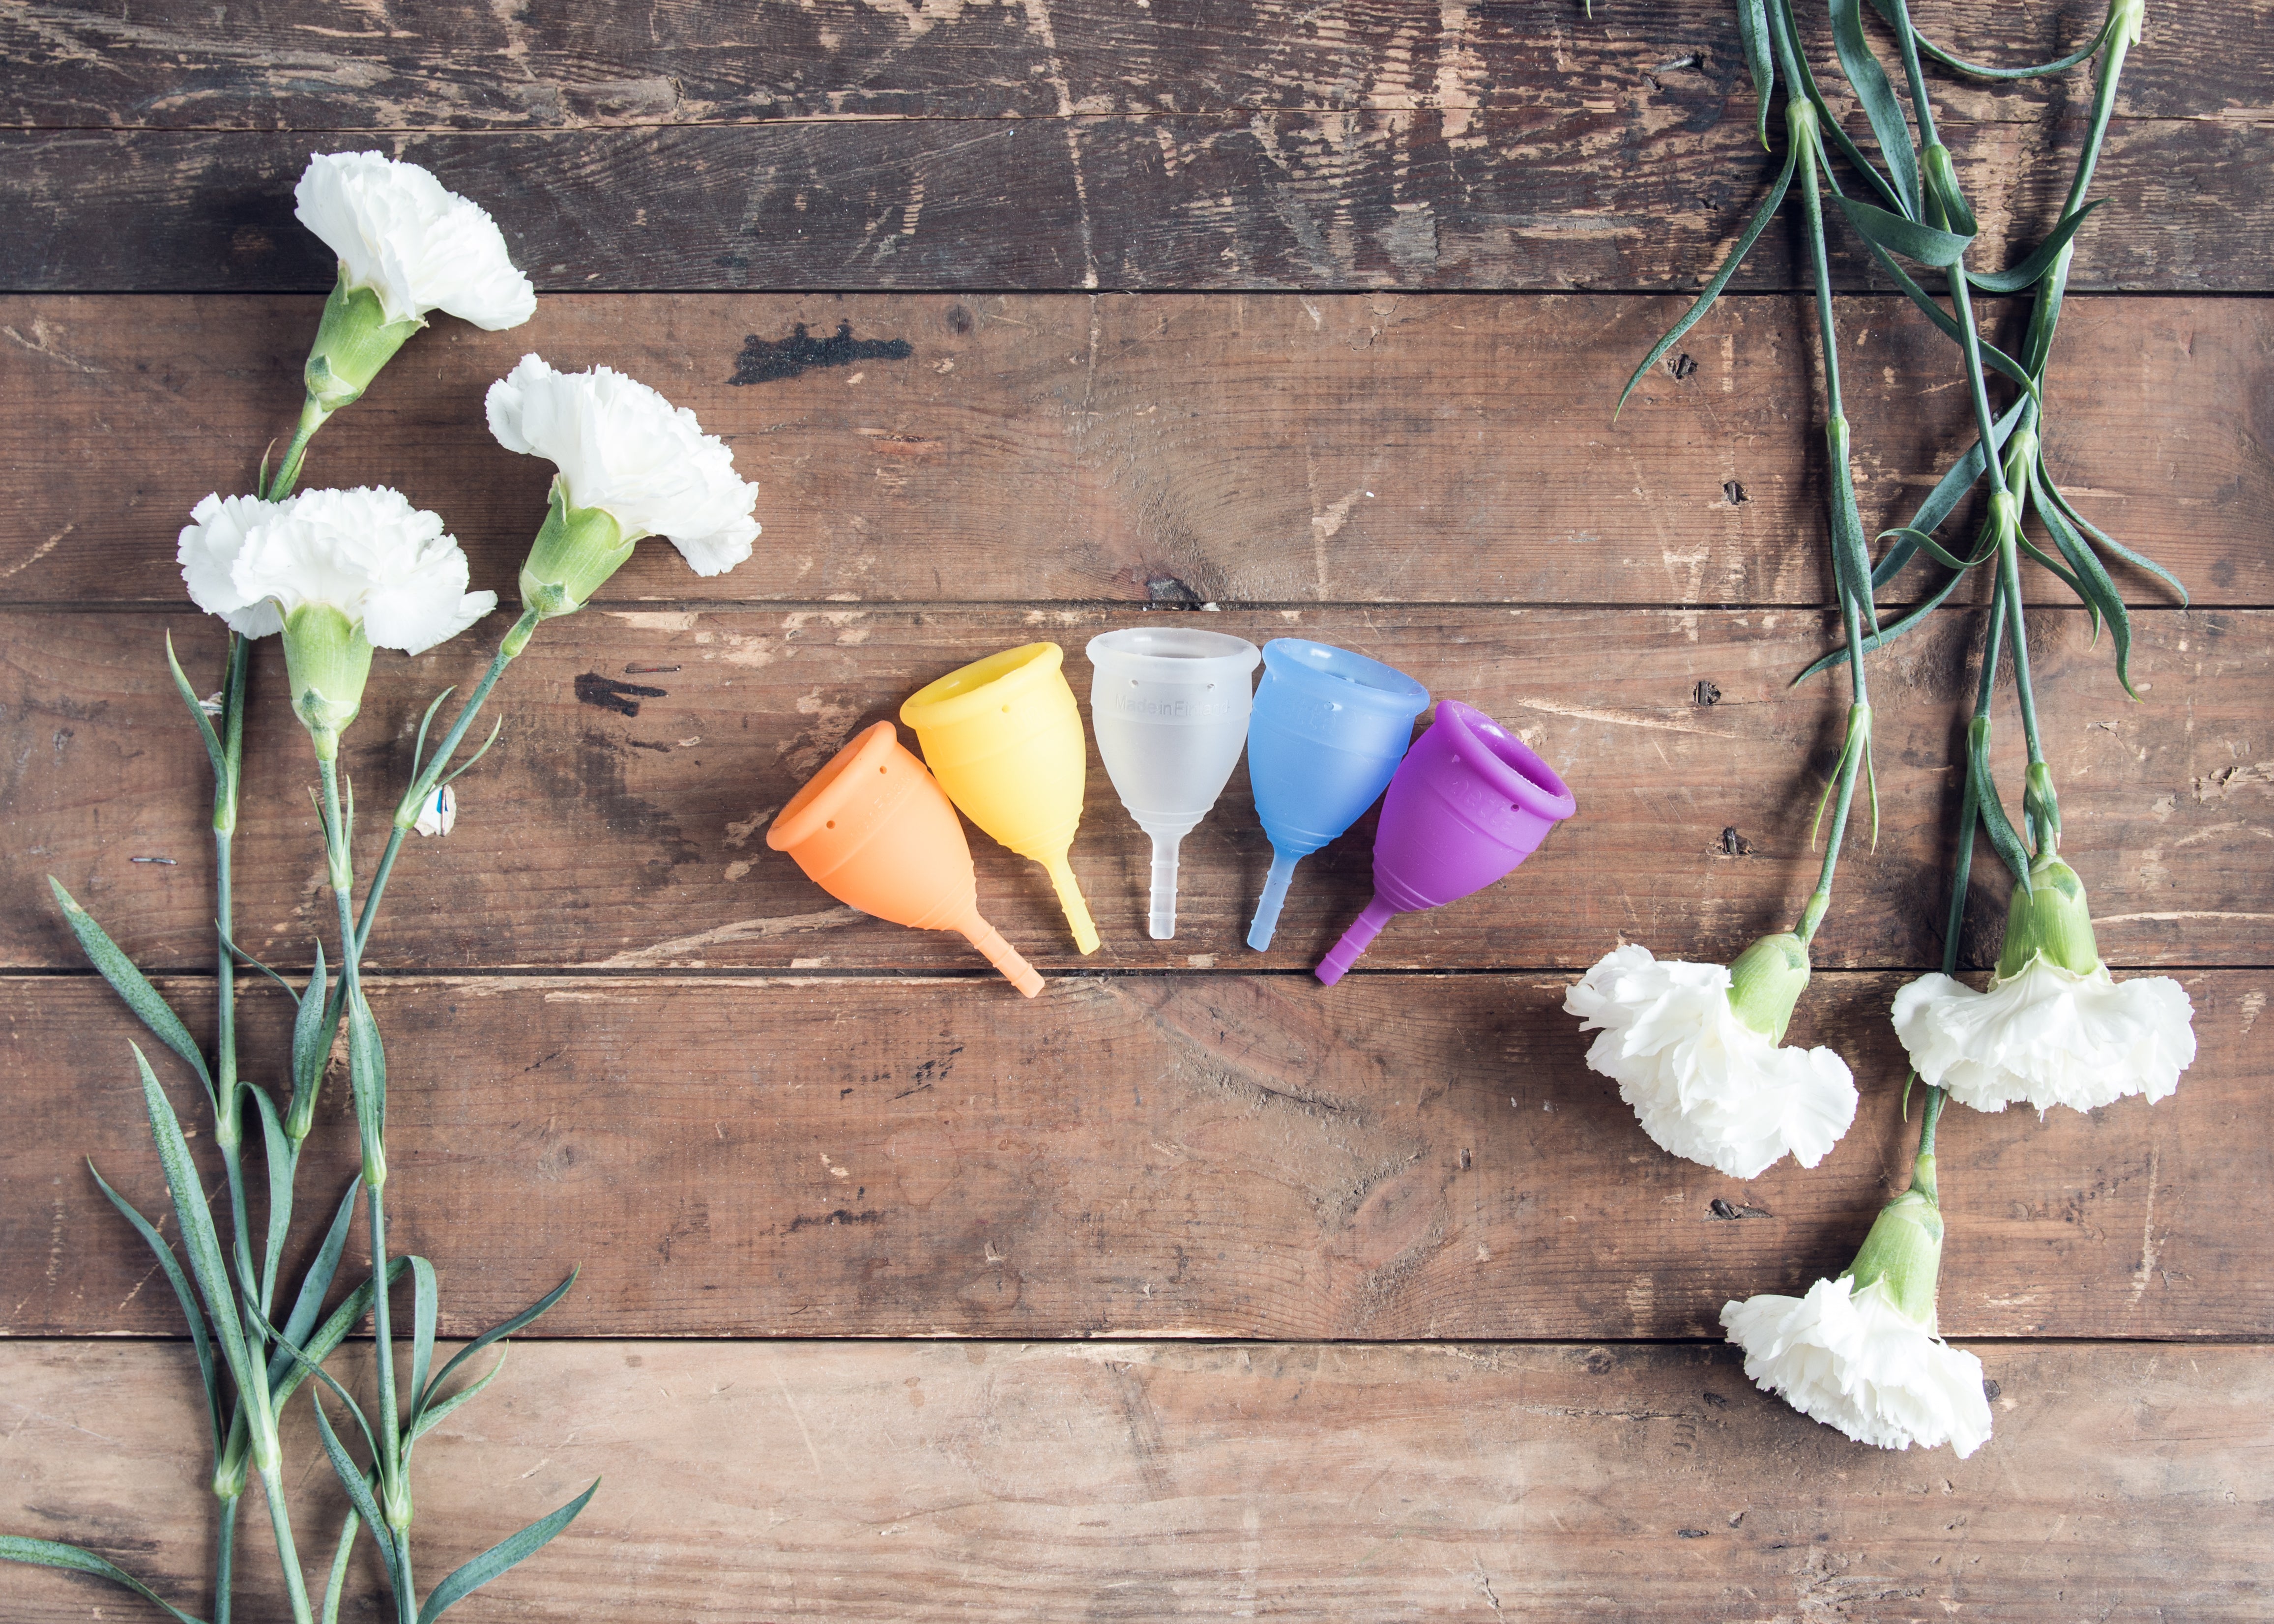 Can Teenagers Use Menstrual Cups? A Teen Shares Her Experience